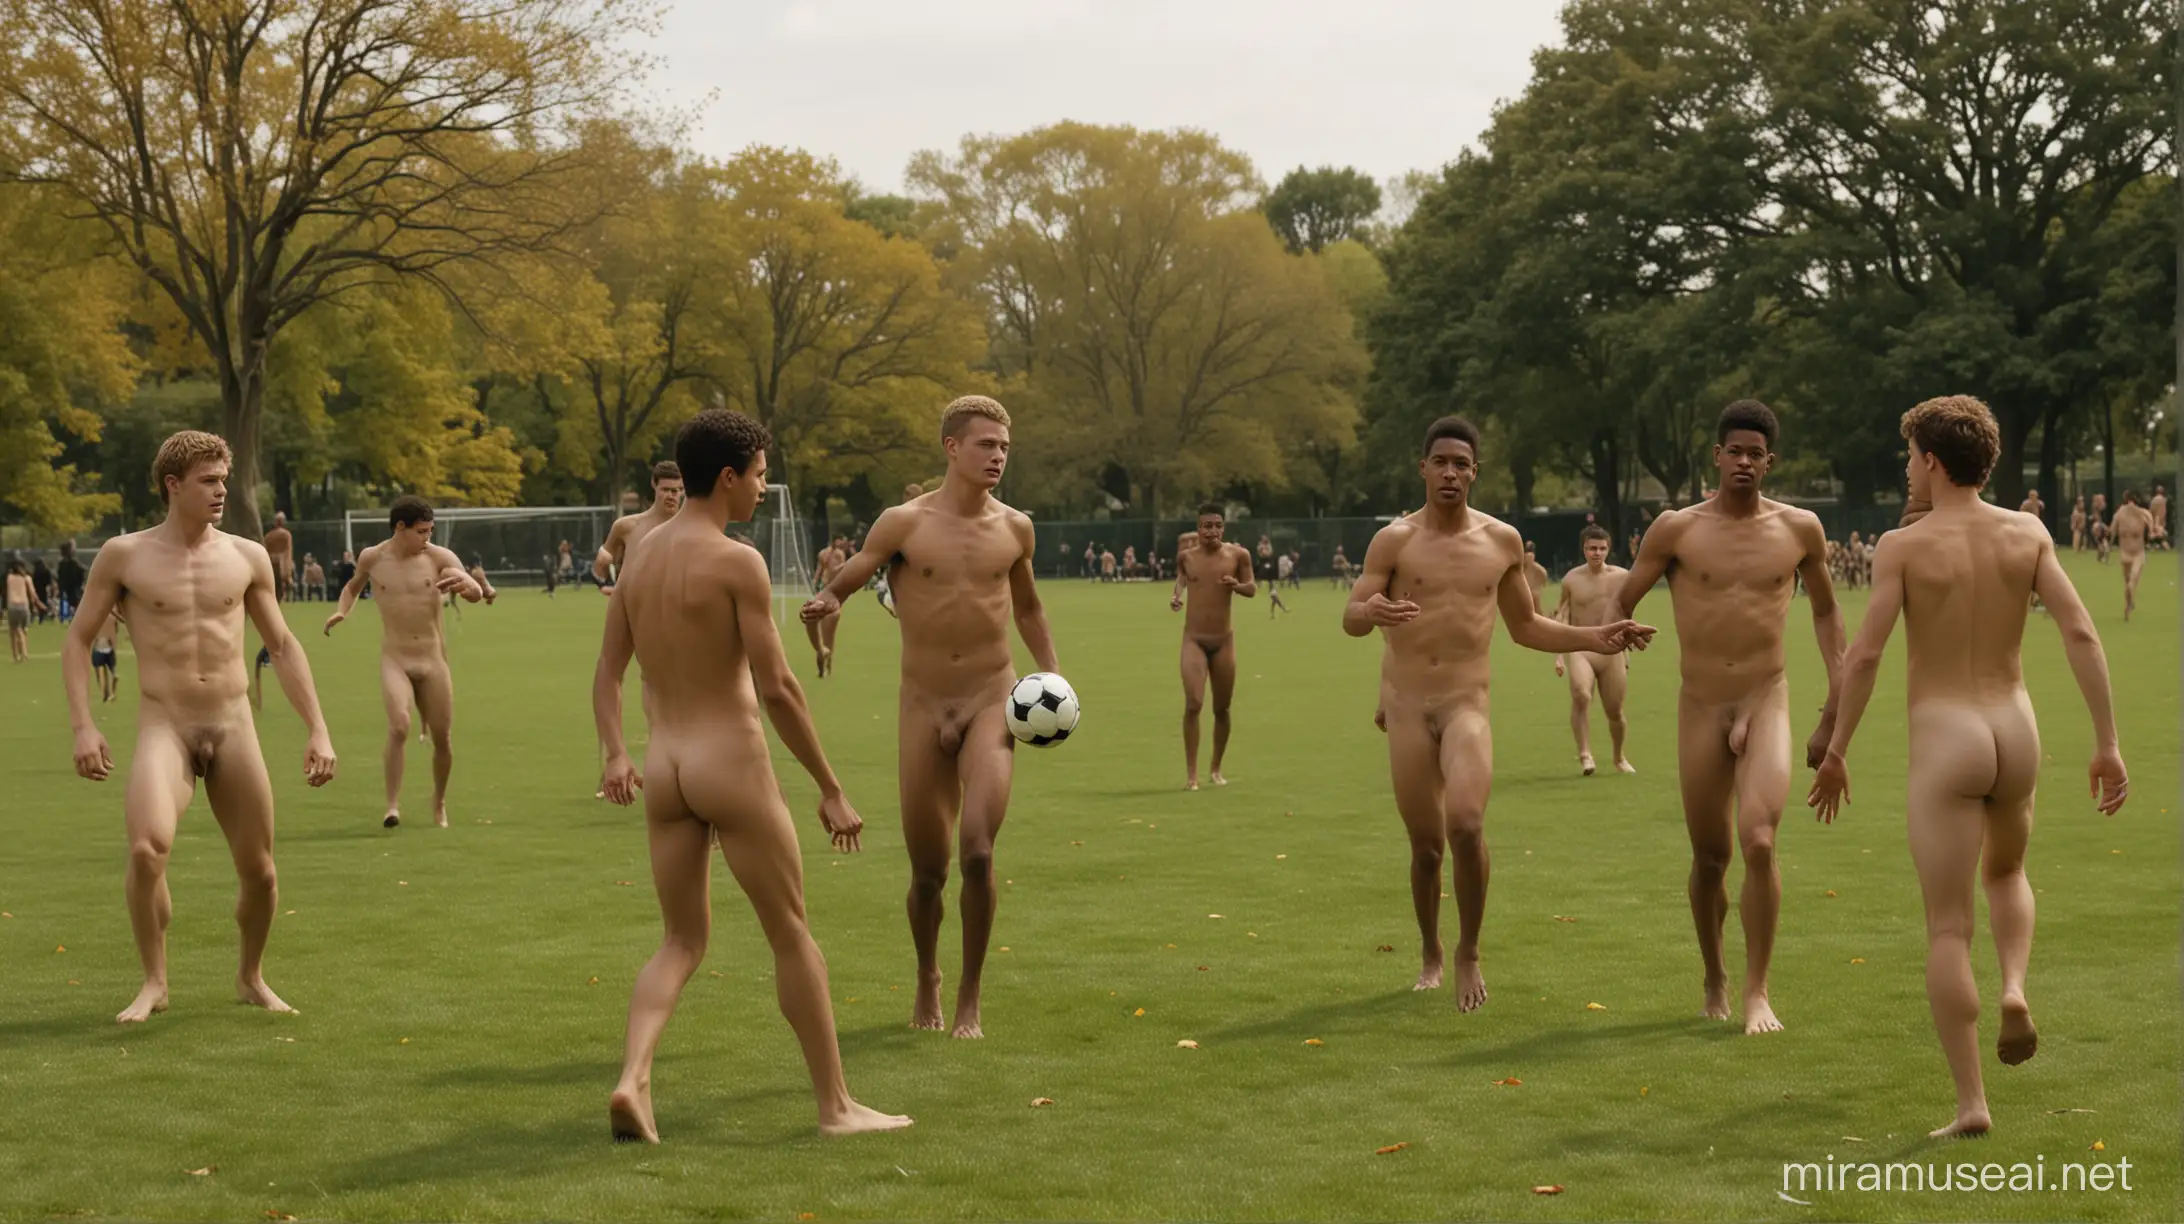 Naked Young Men Soccer Match Intense Action Scene in Park